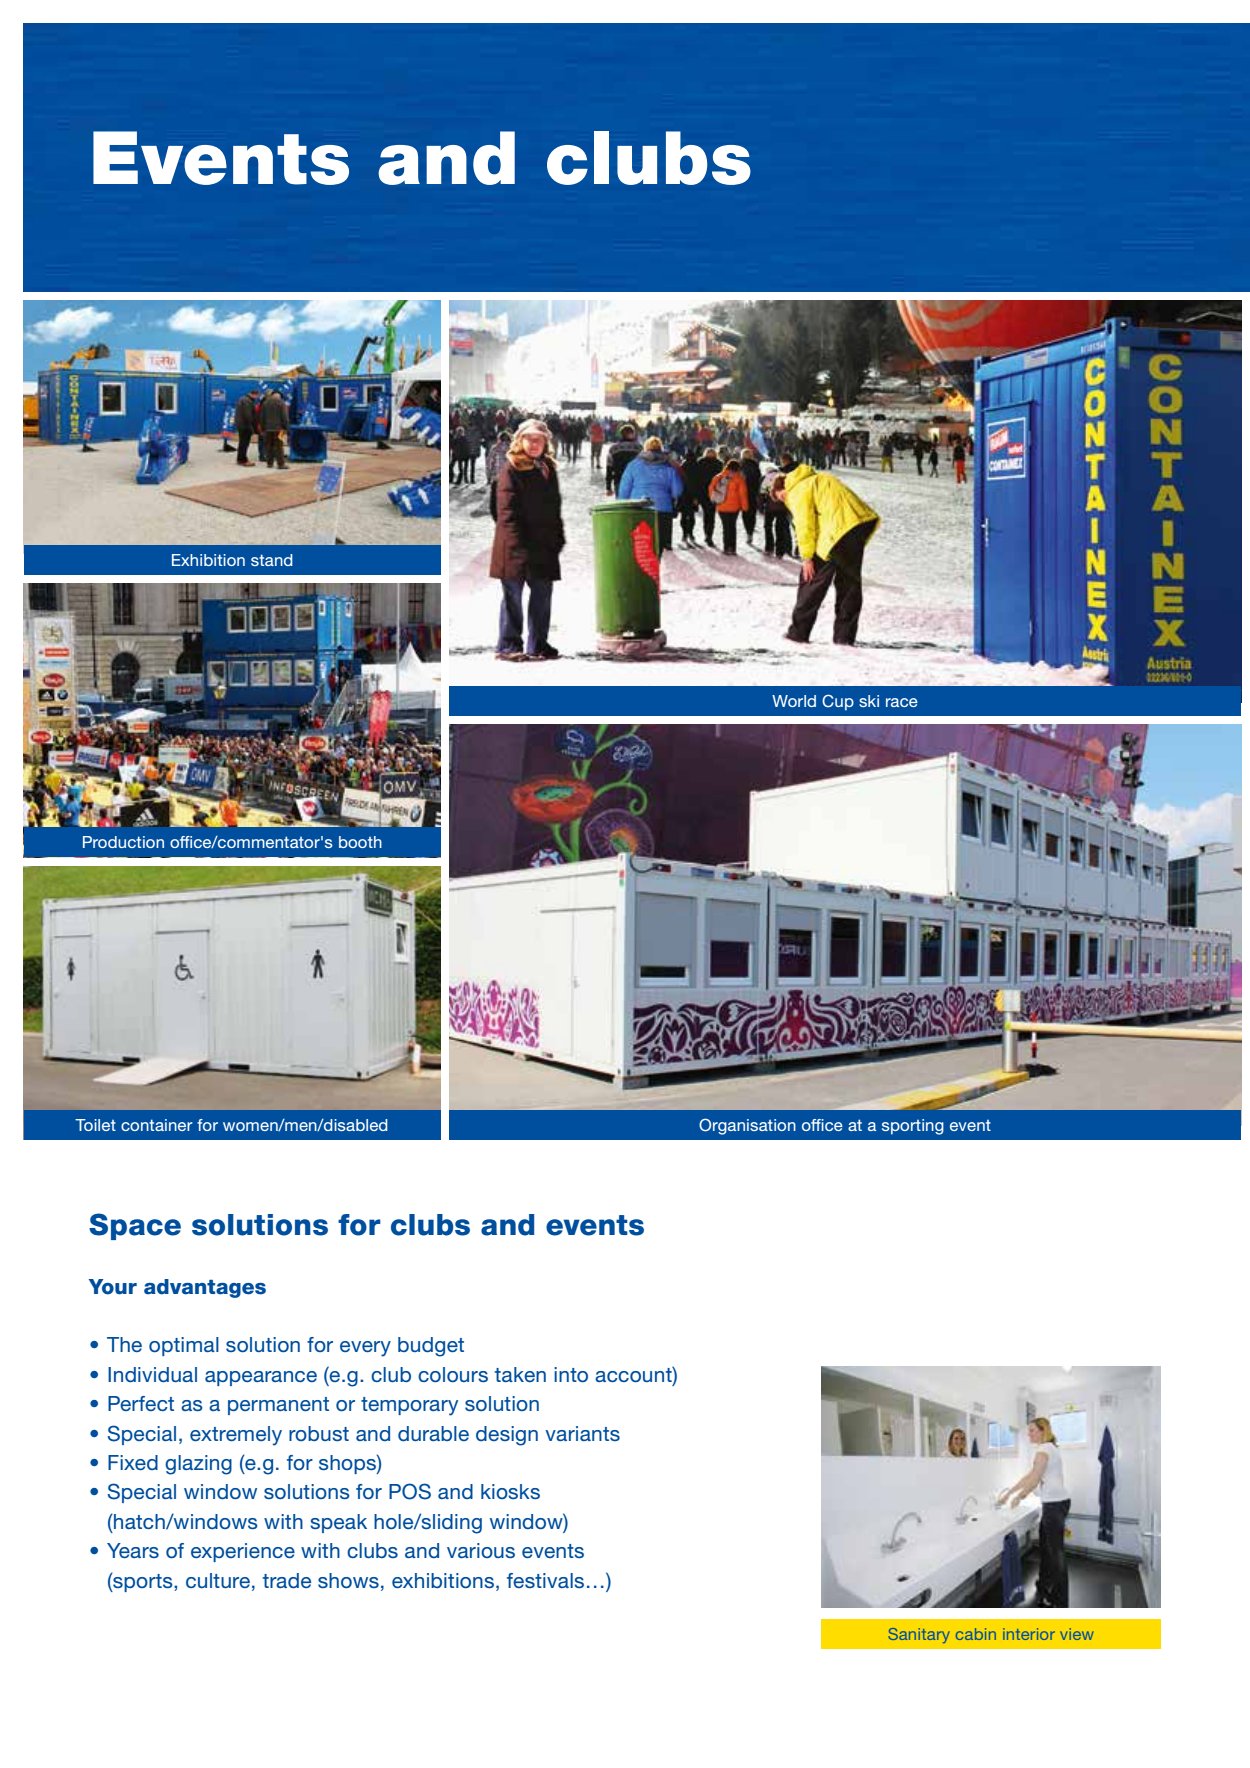 Events clubs Space